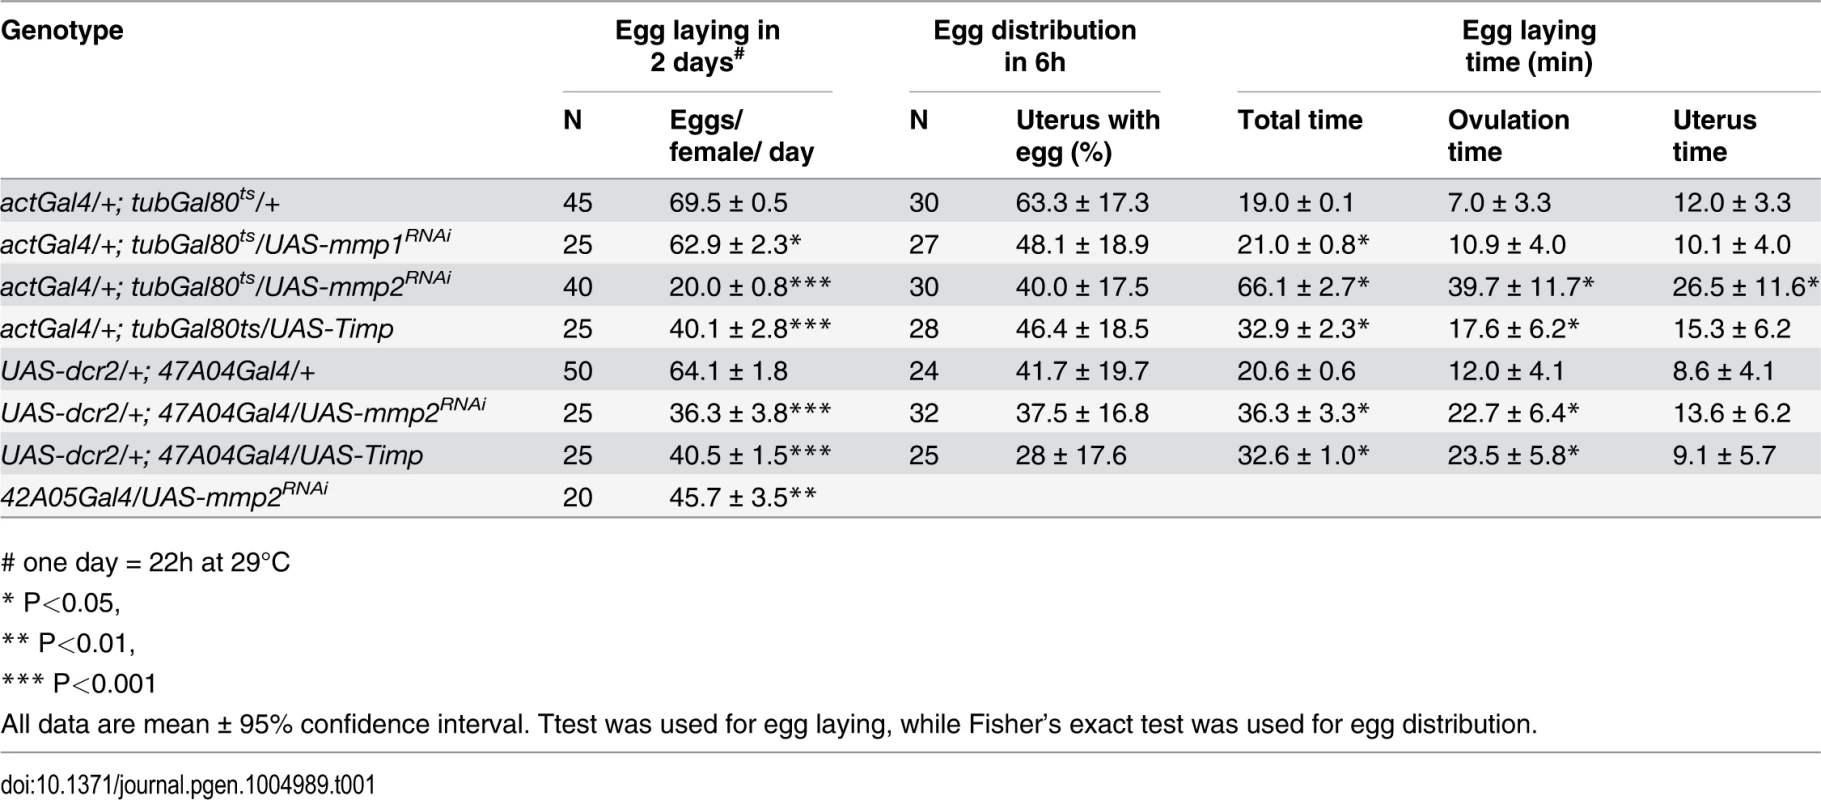 The effect of Mmp activity on egg laying, egg distribution in reproductive tract, and egg laying time.